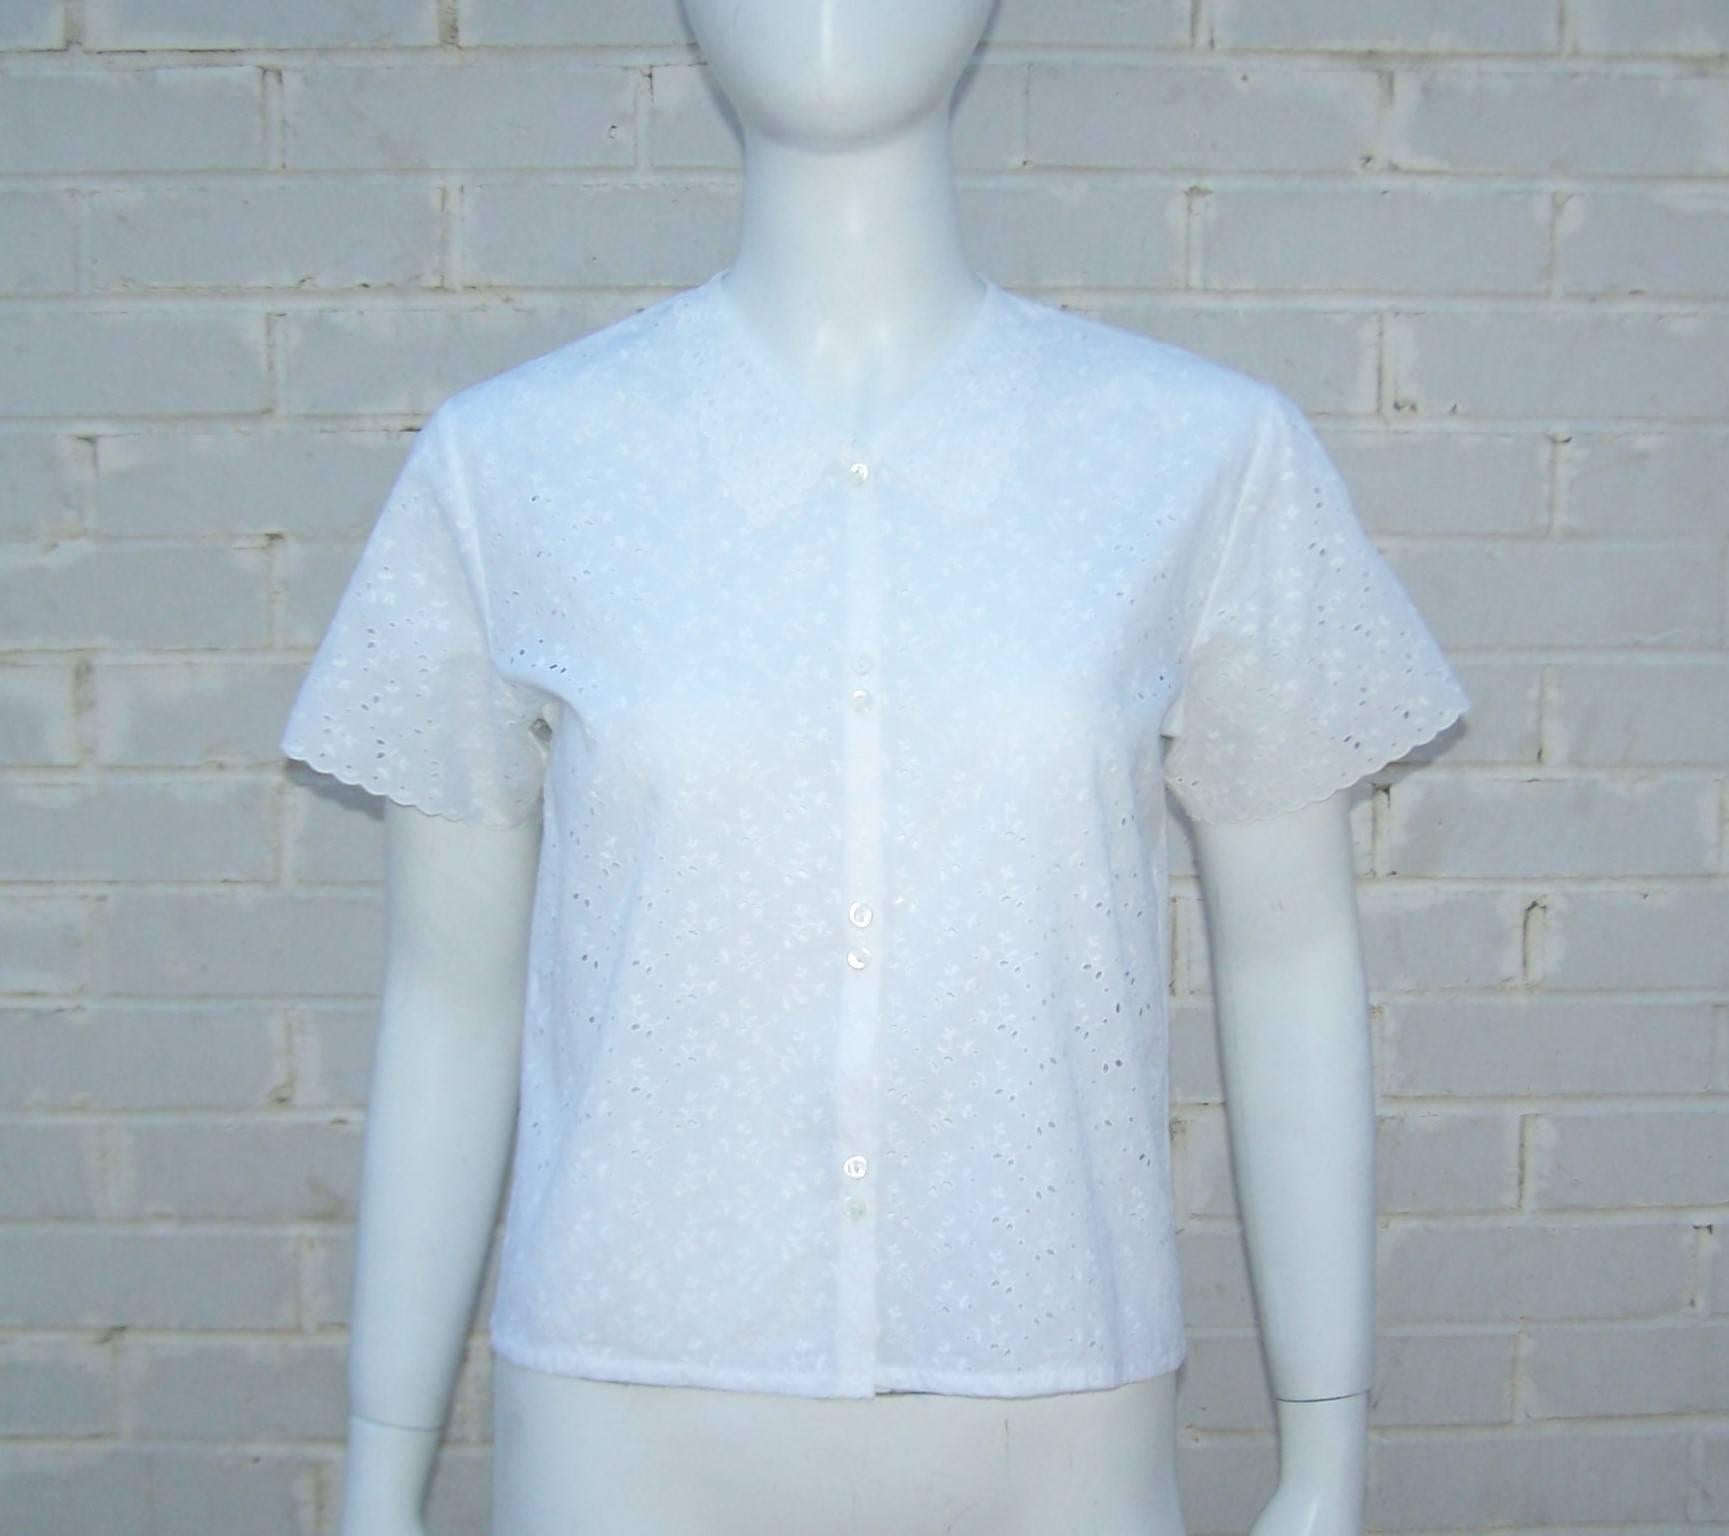 This simple white cotton eyelet top by Cacharel is loaded with charm and perfect for a warm weather wardrobe.  It buttons at the front with scalloped sleeves and a boxy cropped silhouette.  Pair it with high waist jeans and flat sandals for an easy